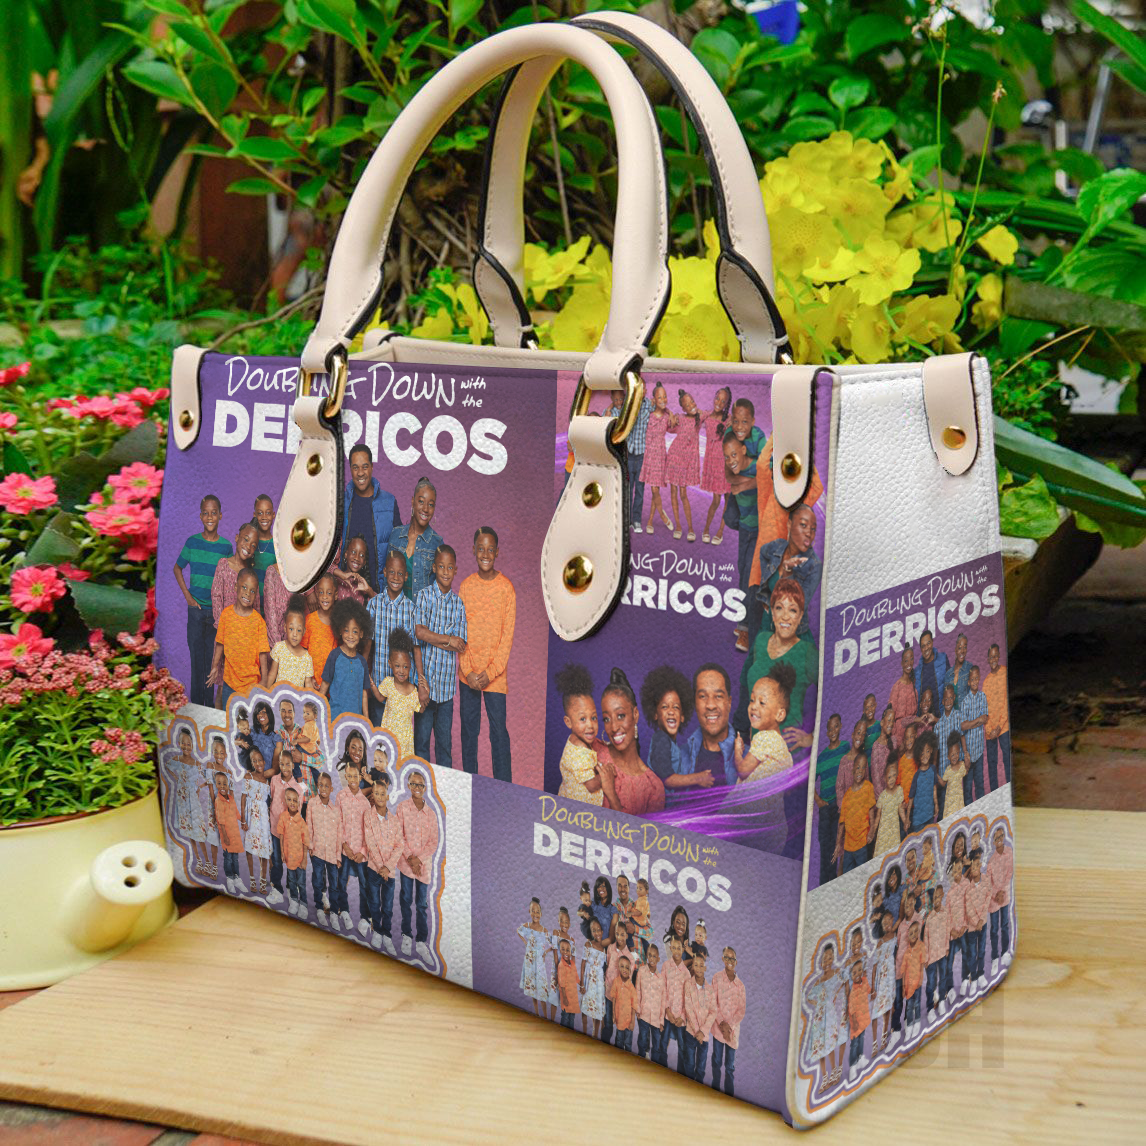 Doubling Down With the Derricos Women Leather Hand Bag